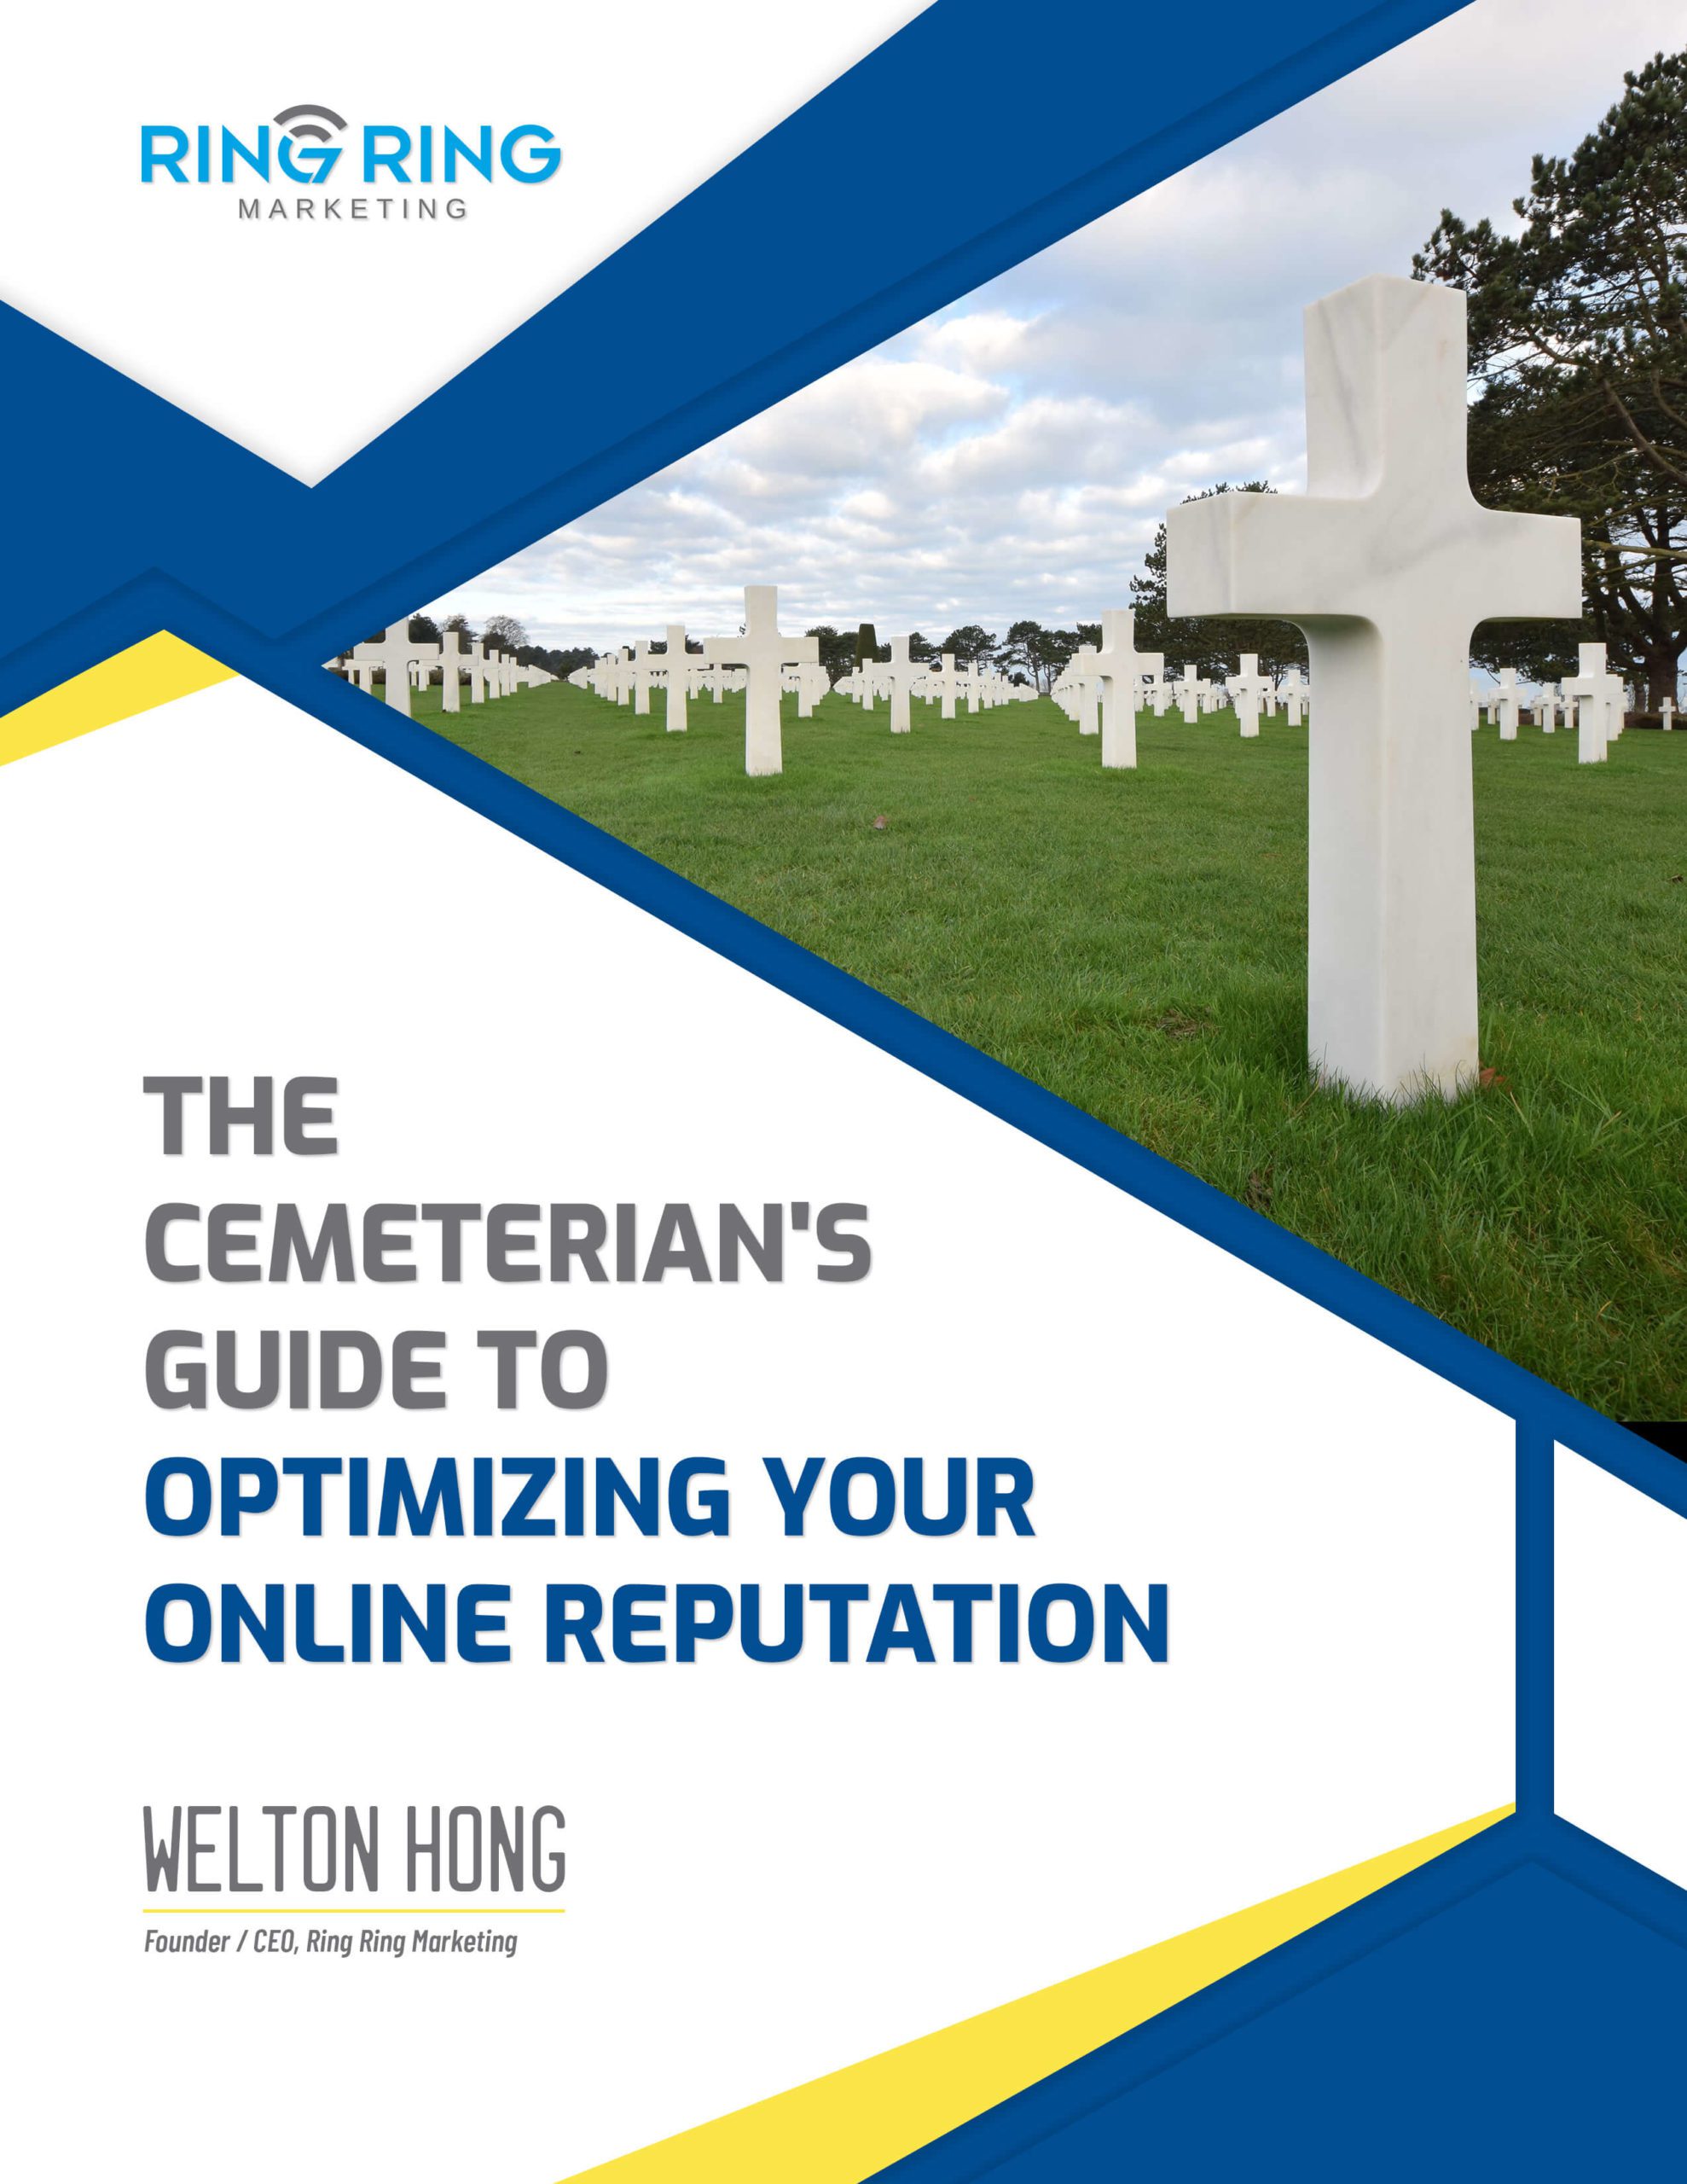 The Cemeterian’s Guide to Optimizing Your Online Reputation